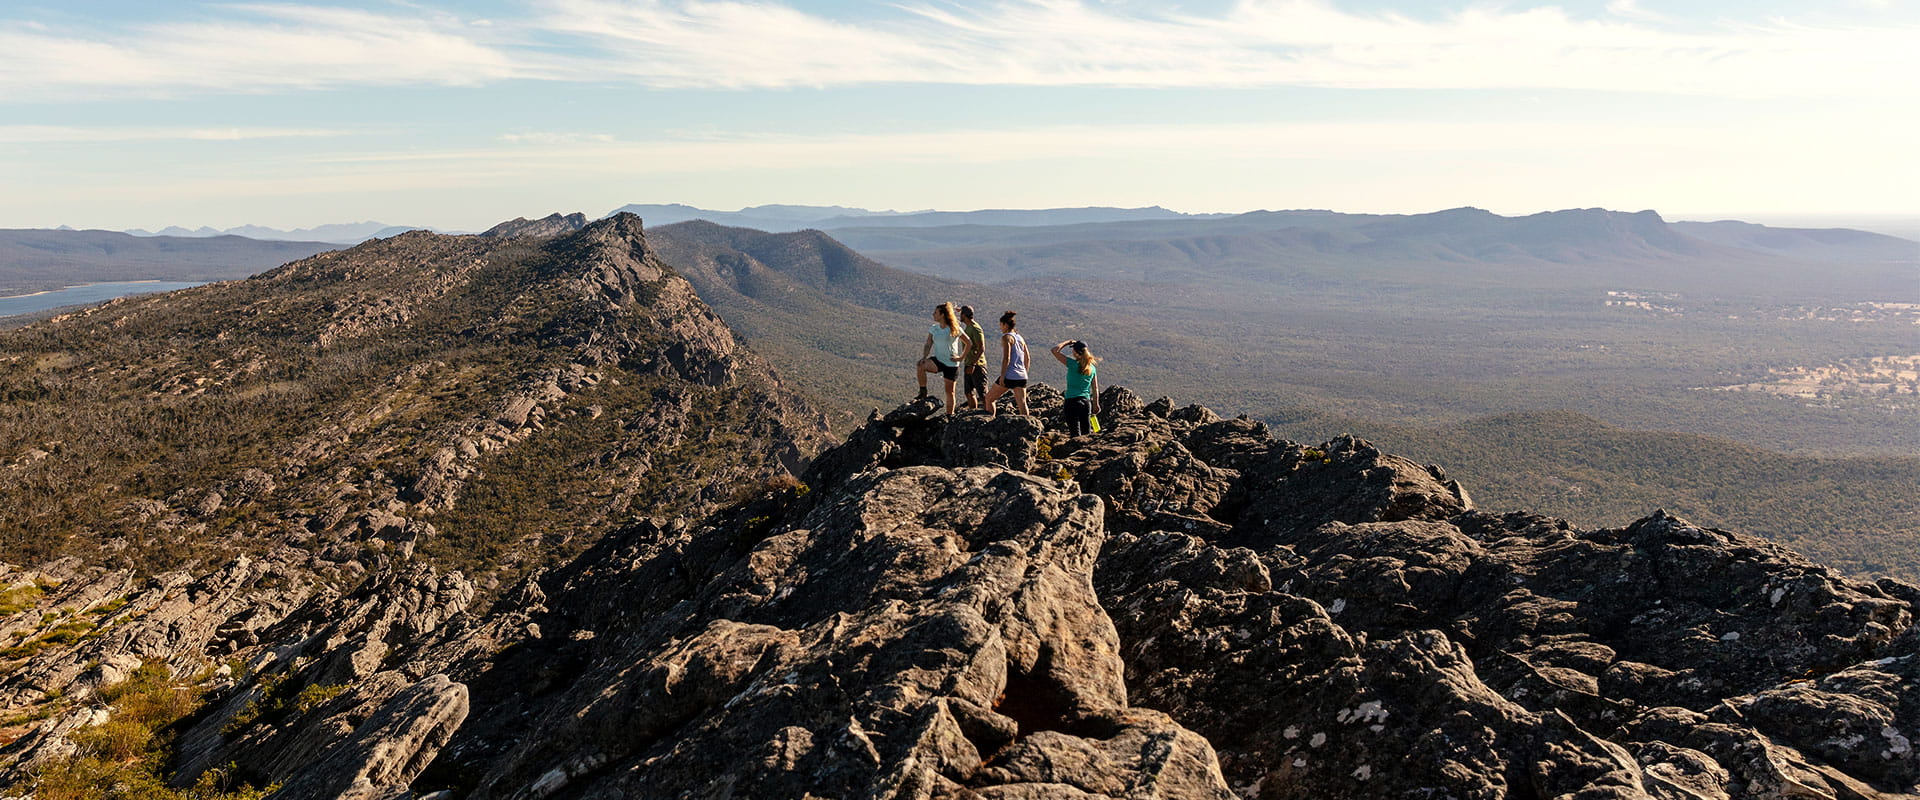 A group of hikers walk stand at the top of Gar's summit overlooking the landscape